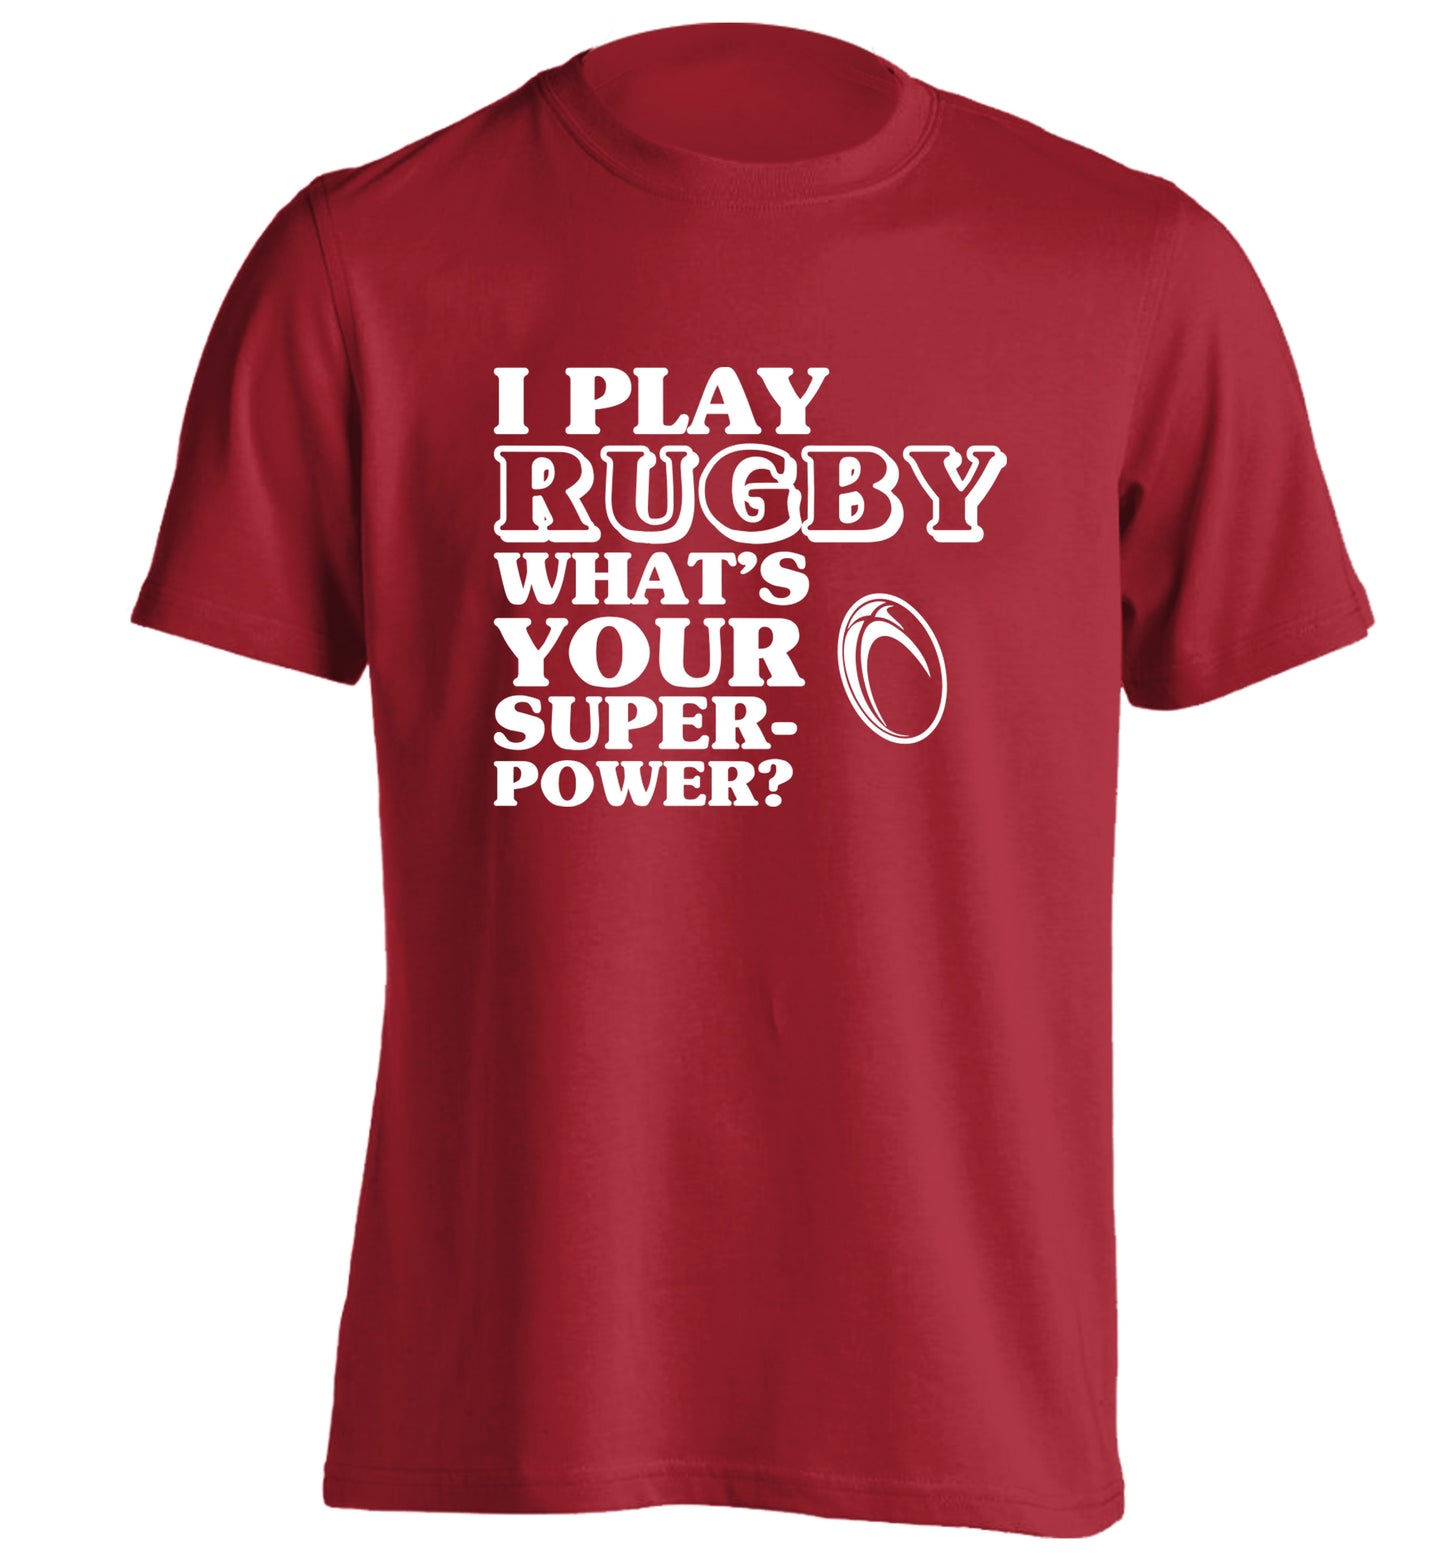 I play rugby what's your superpower? adults unisex red Tshirt 2XL